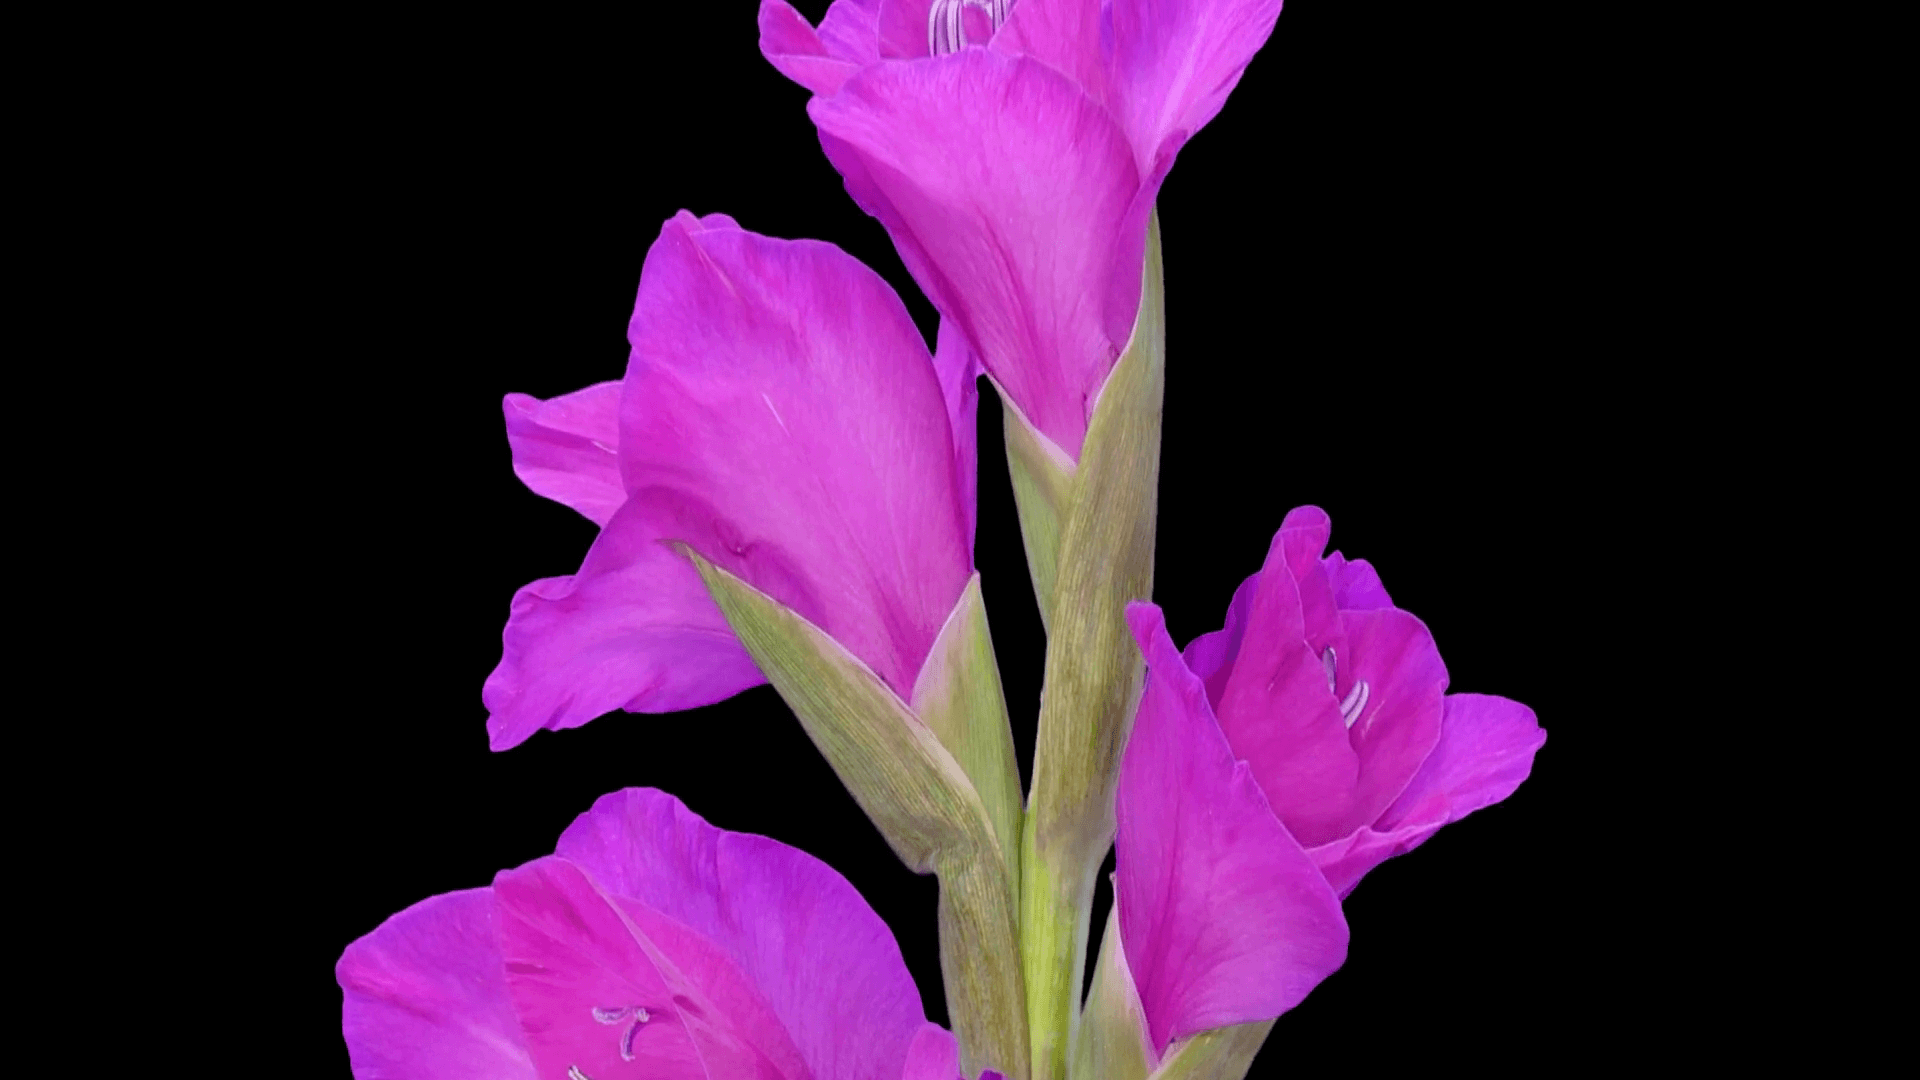 Time Lapse Of Opening Purple Gladiolus Flower 6c1 In PNG+ Format With ALPHA Transparency Channel Isolated On Black Background